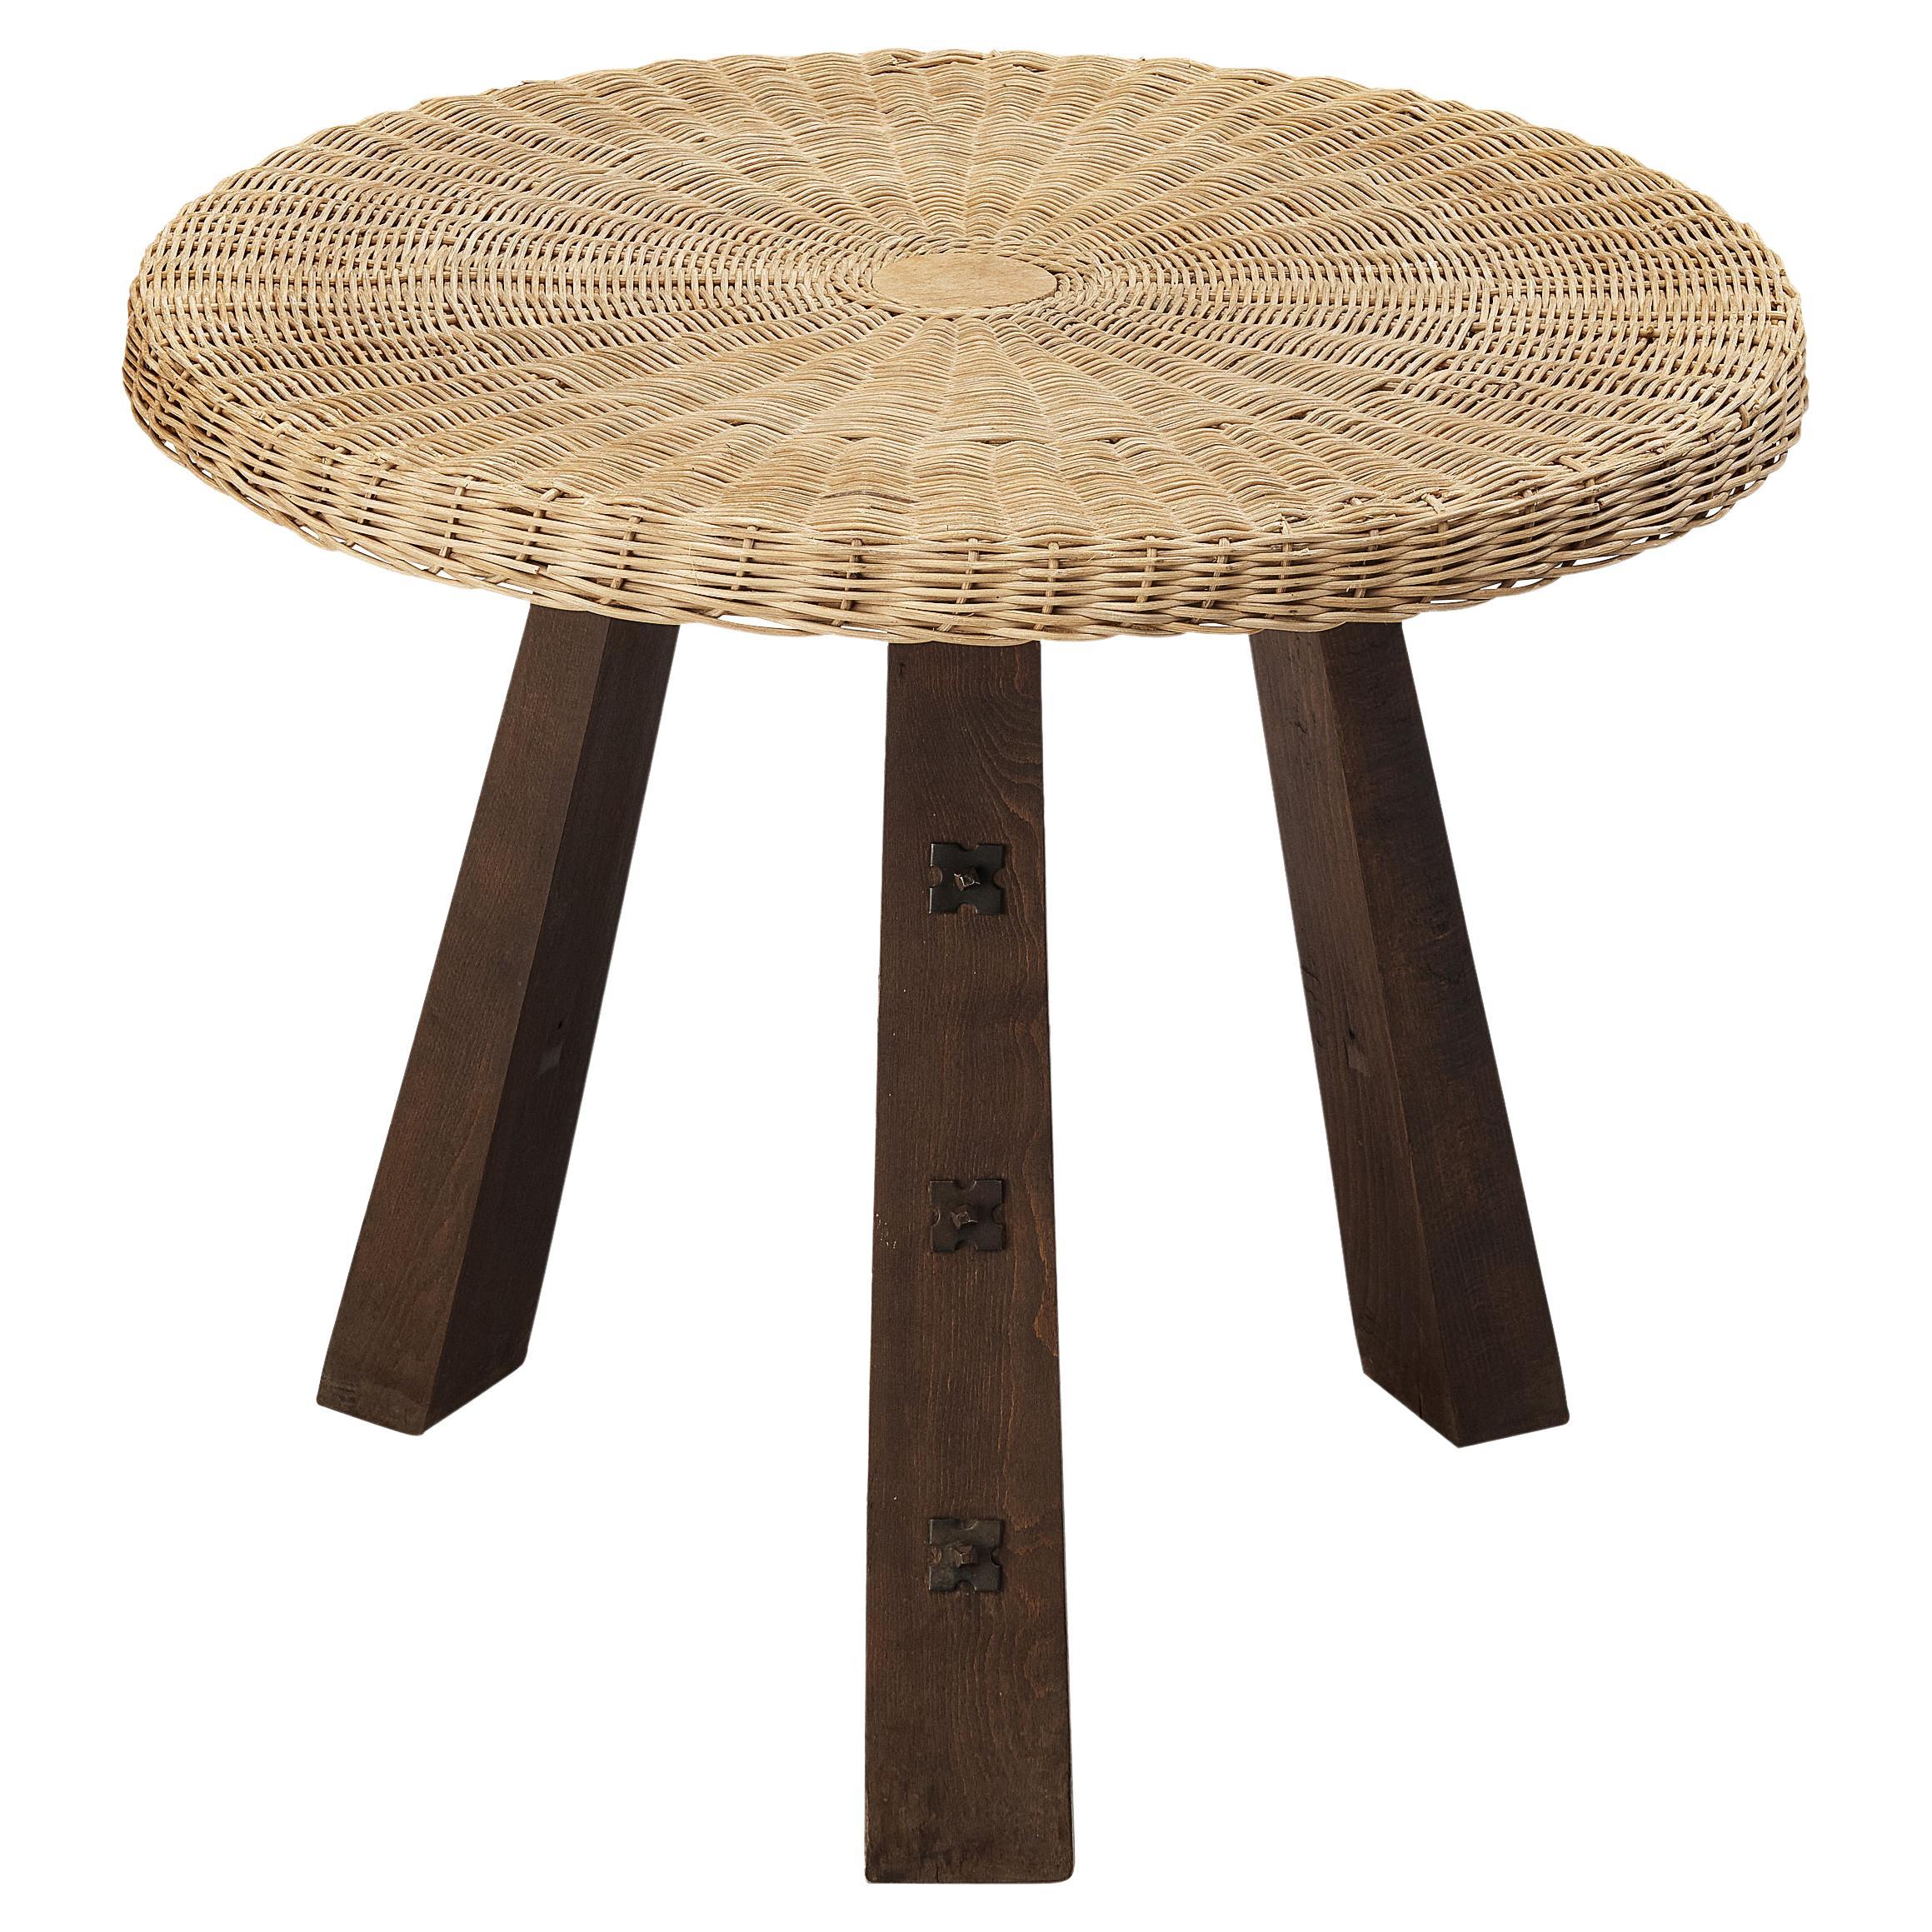 Spanish Table in Cane Wicker